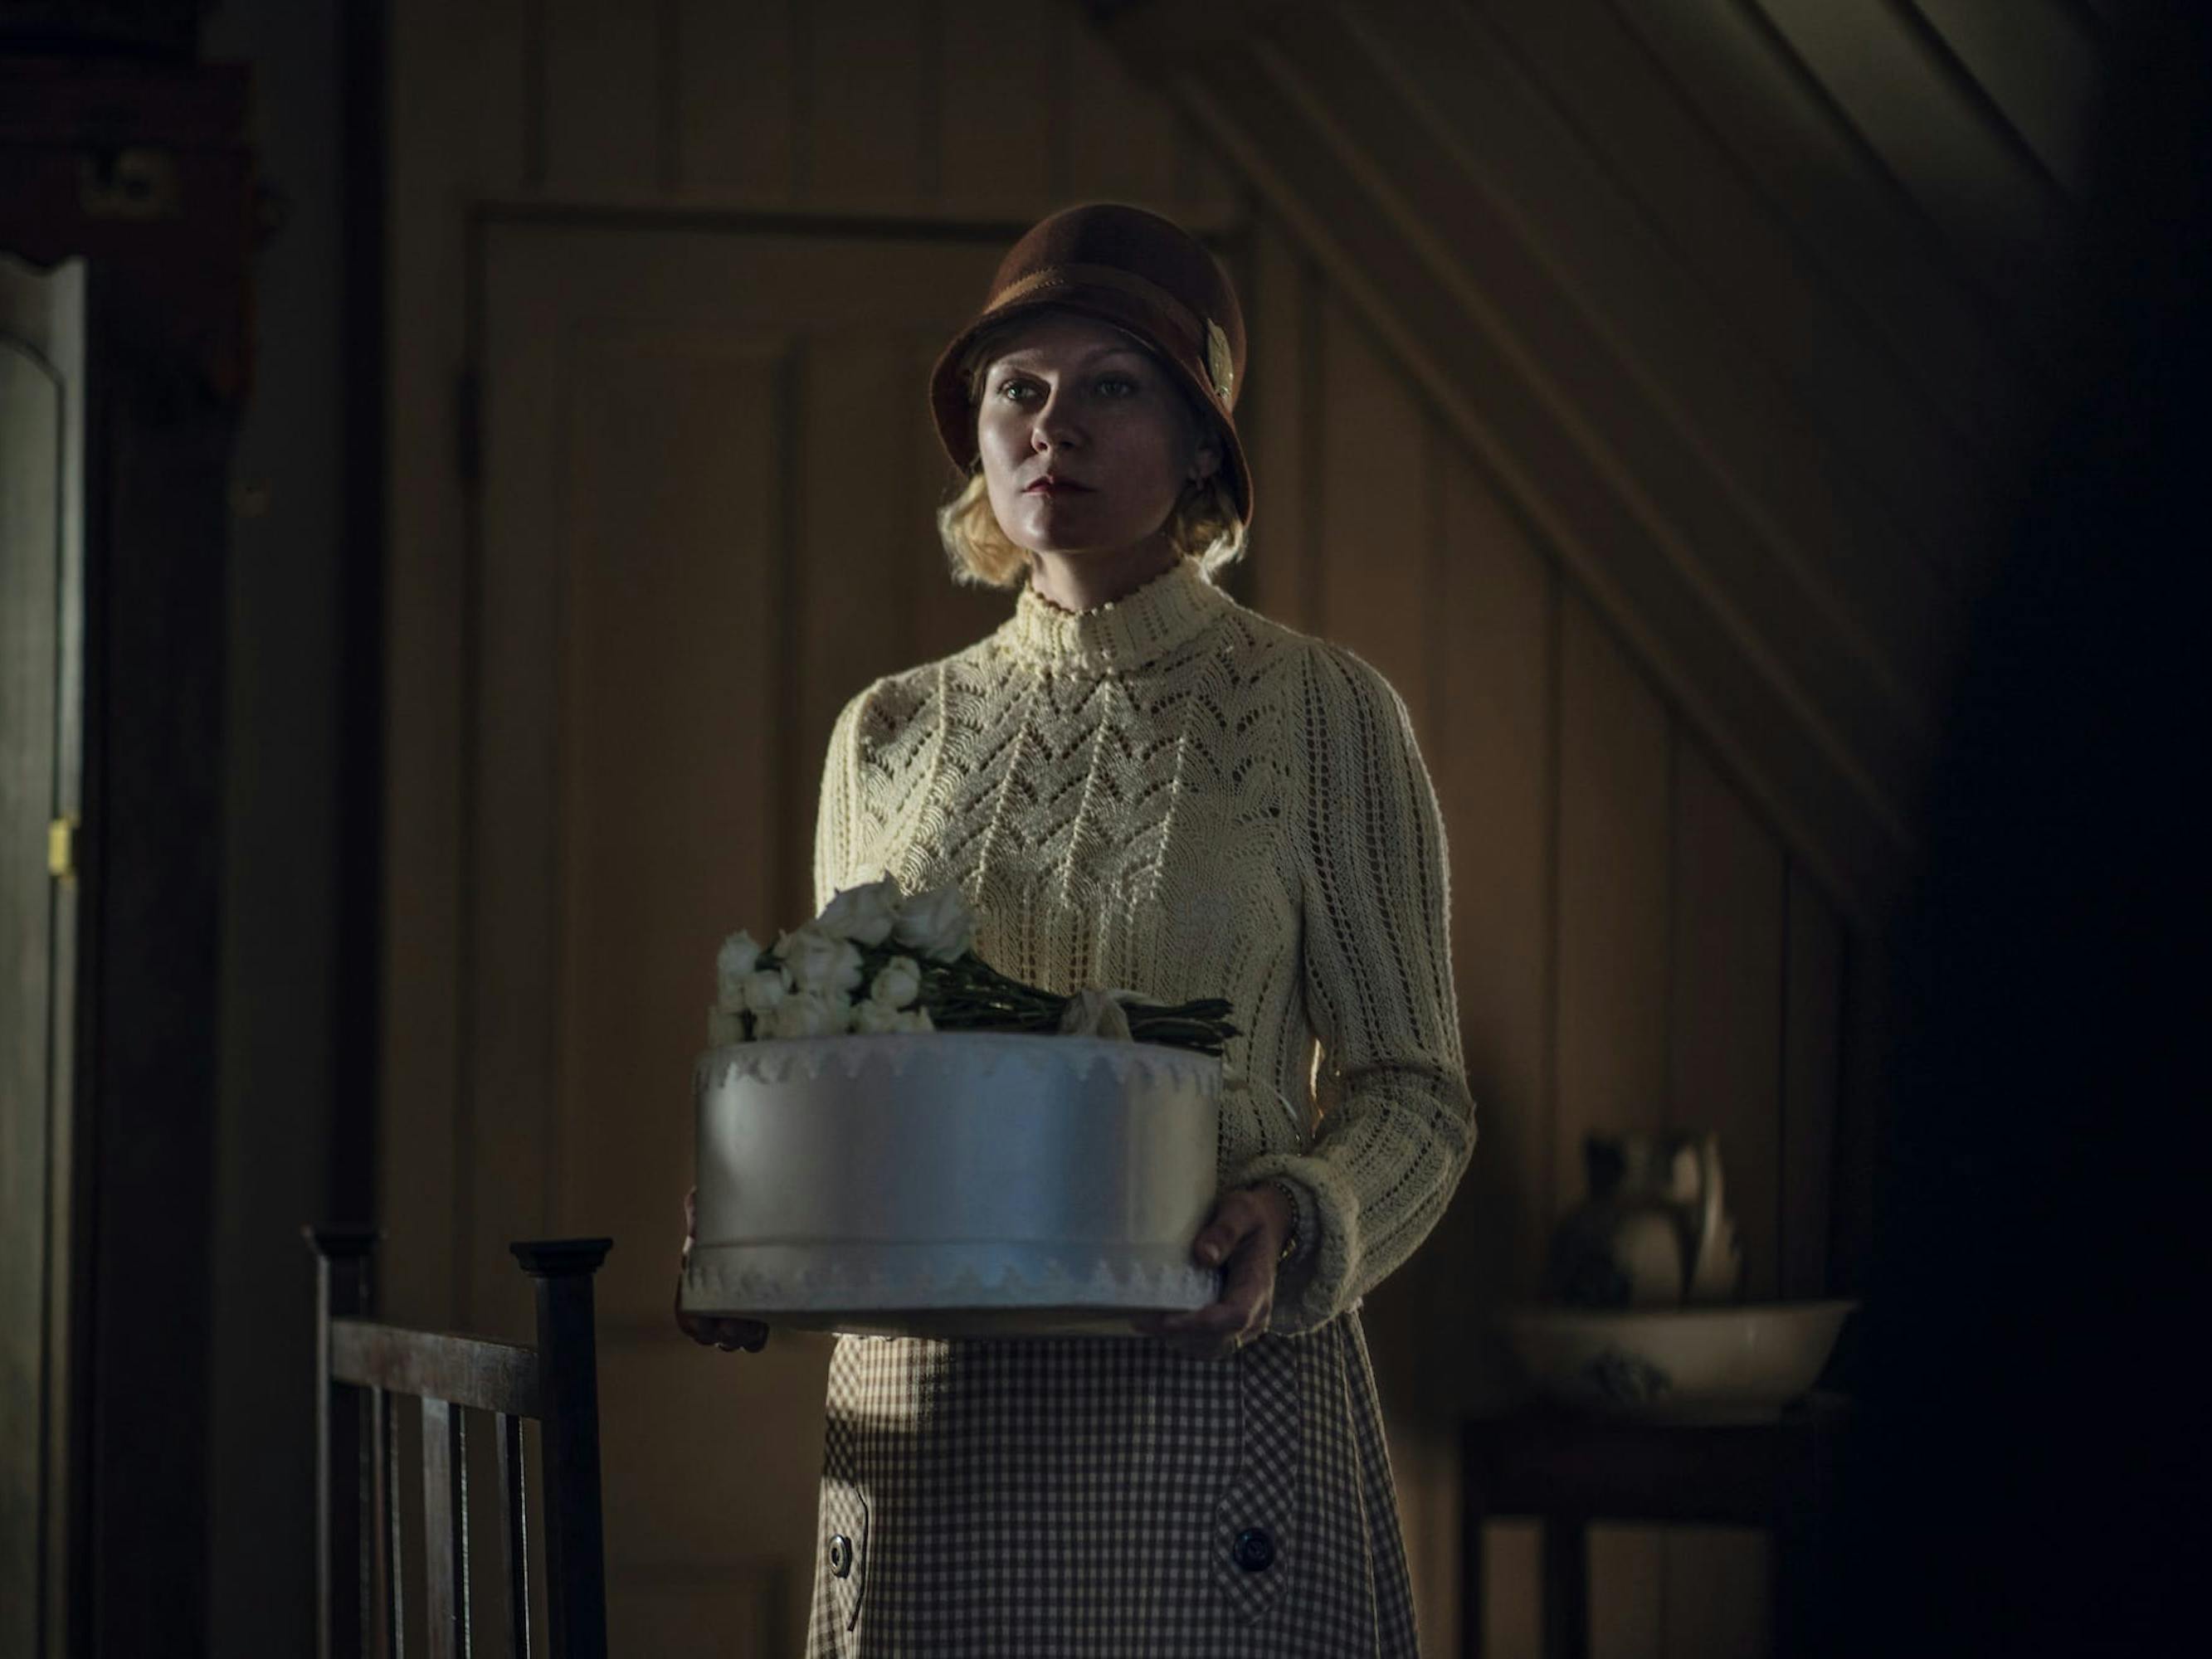 Rose (Kirsten Dunst) carries a white cake, with flowers on top. She wears a white sweater, brown hat, and plaid skirt.